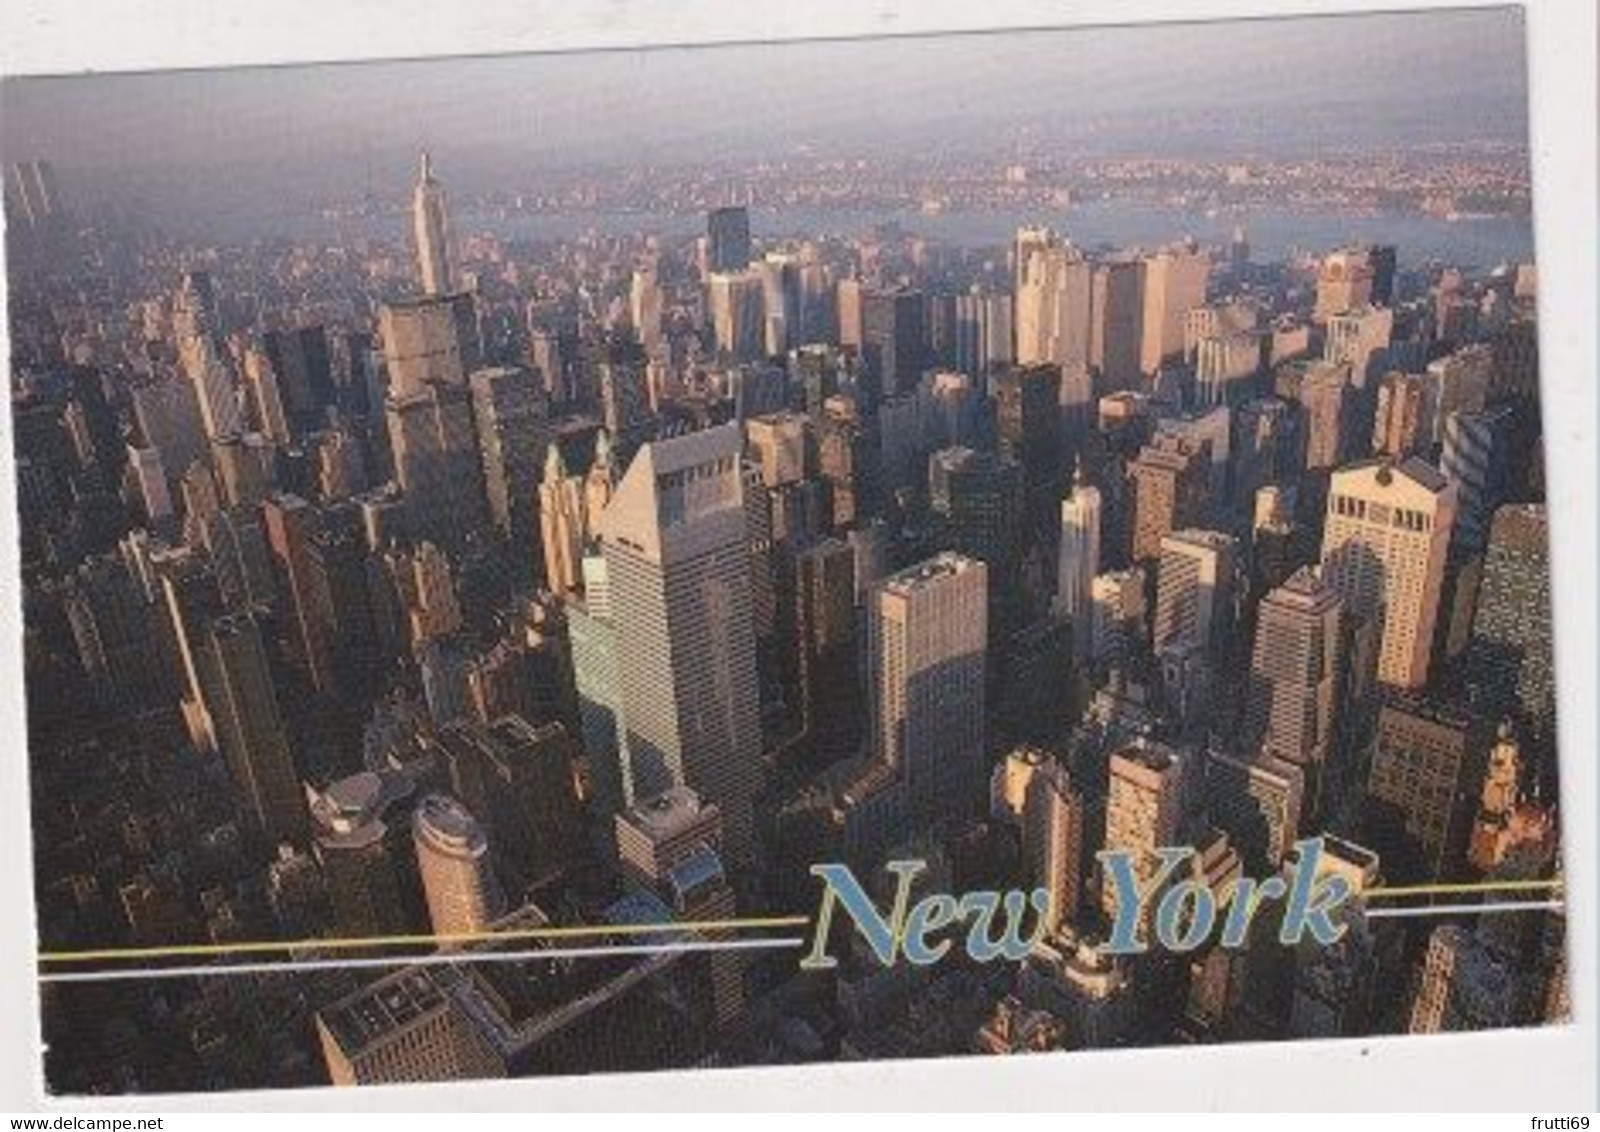 AK 019680 USA - New York City - Multi-vues, Vues Panoramiques